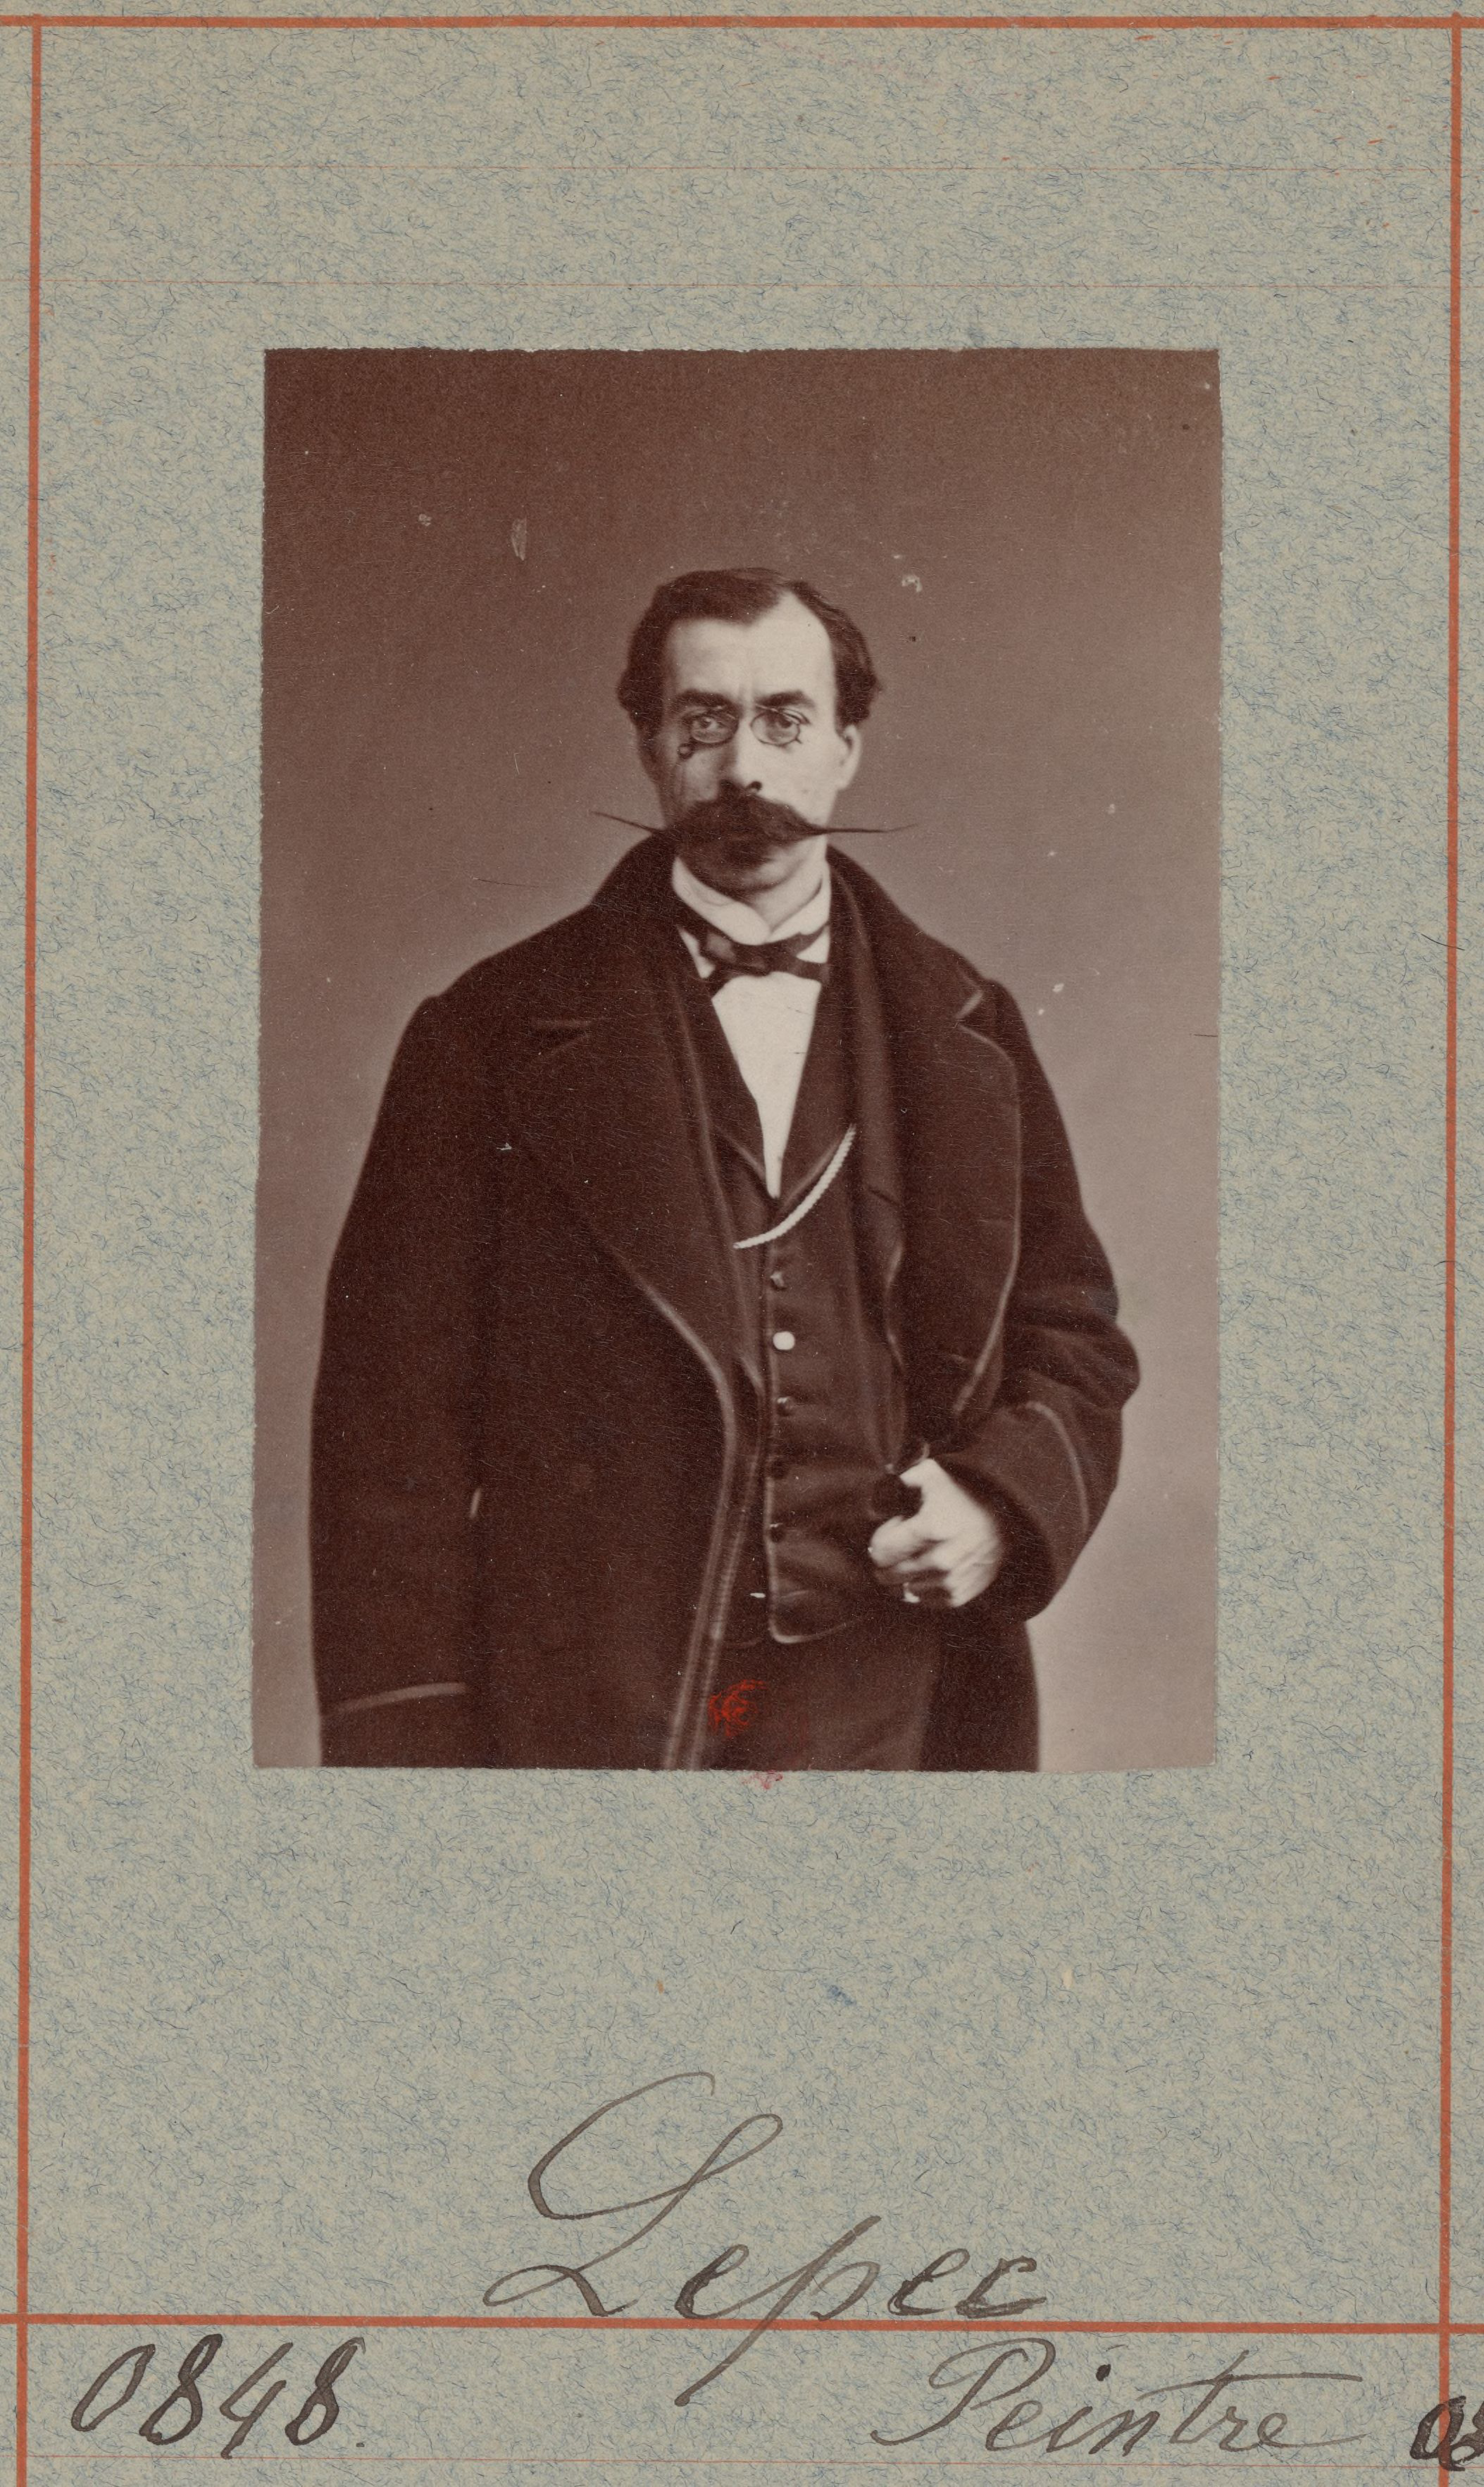 A reddish photography of a man with a large black coat and vest. He wears small circular glasses along with a long and skinny moustache. The words at the bottom of the image say &ldquo;Lepec&rdquo;